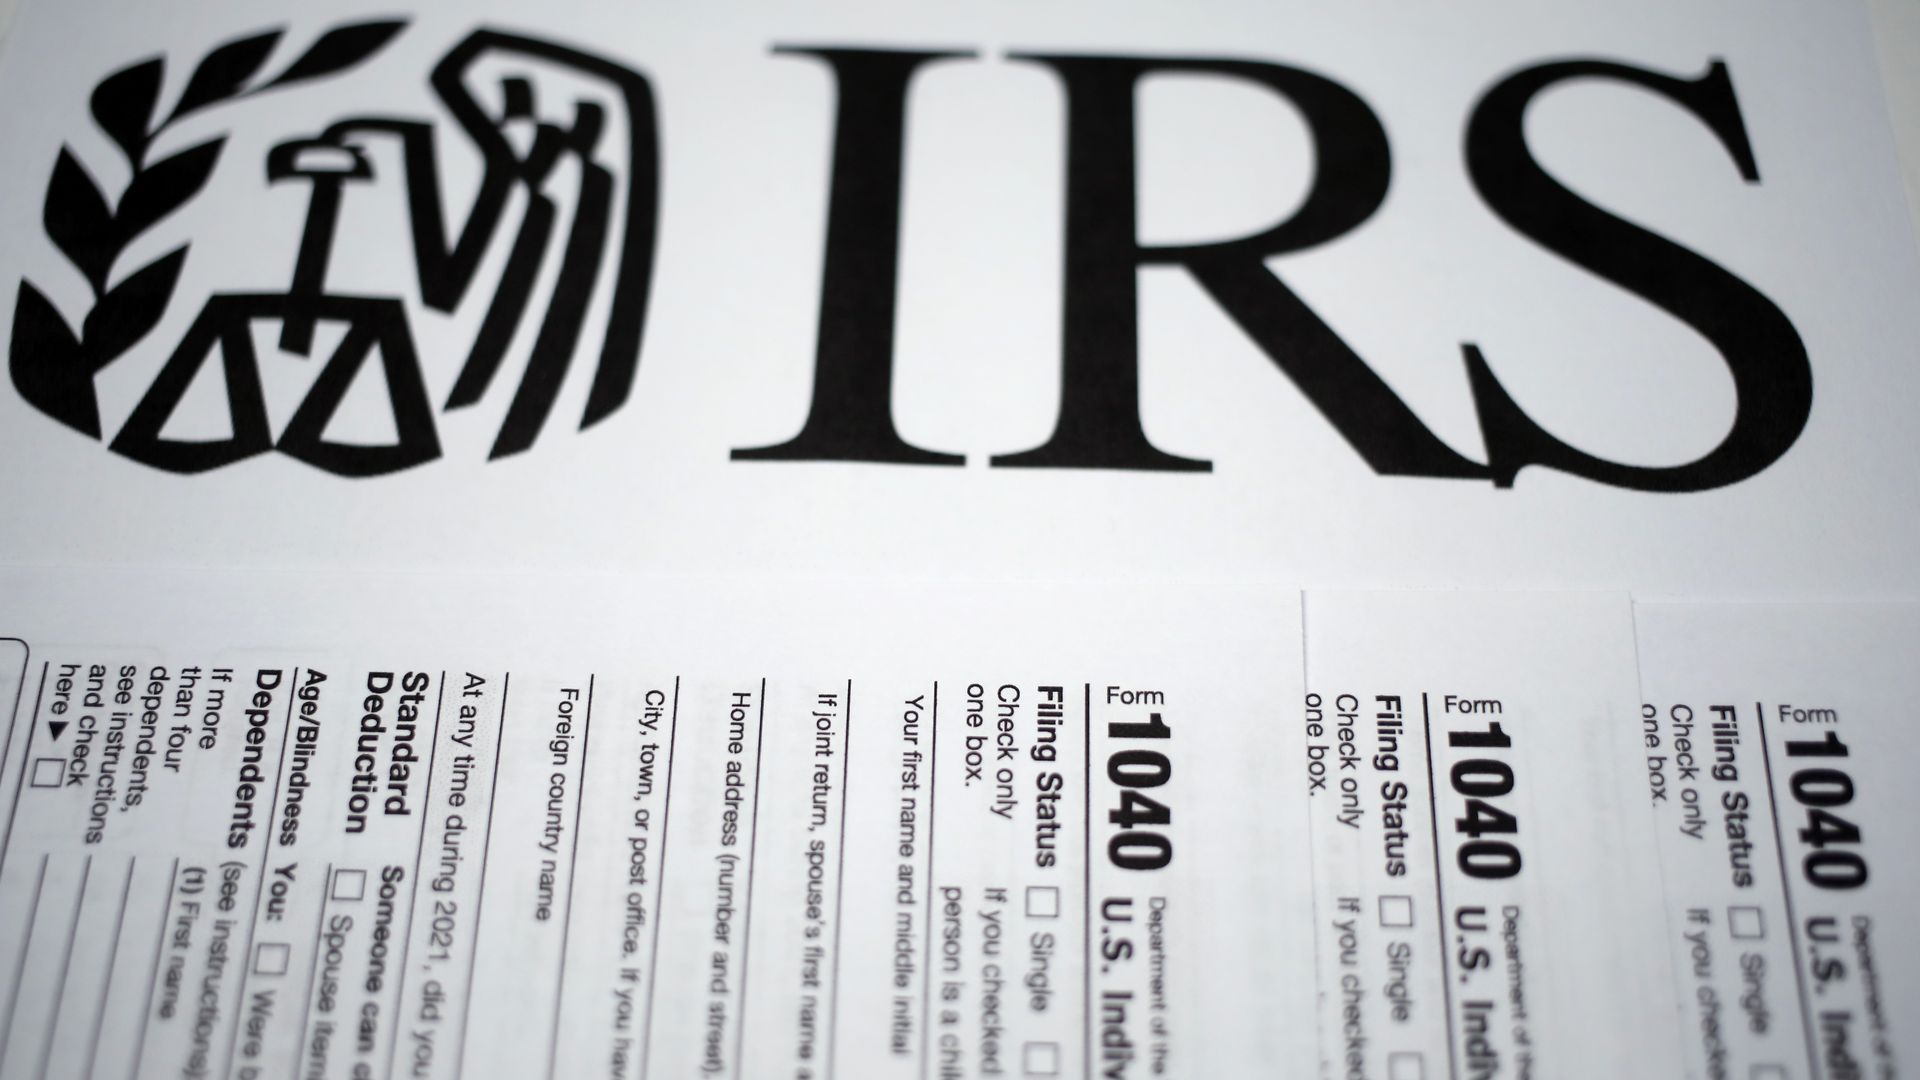 IRS 1040 forms with IRS logo